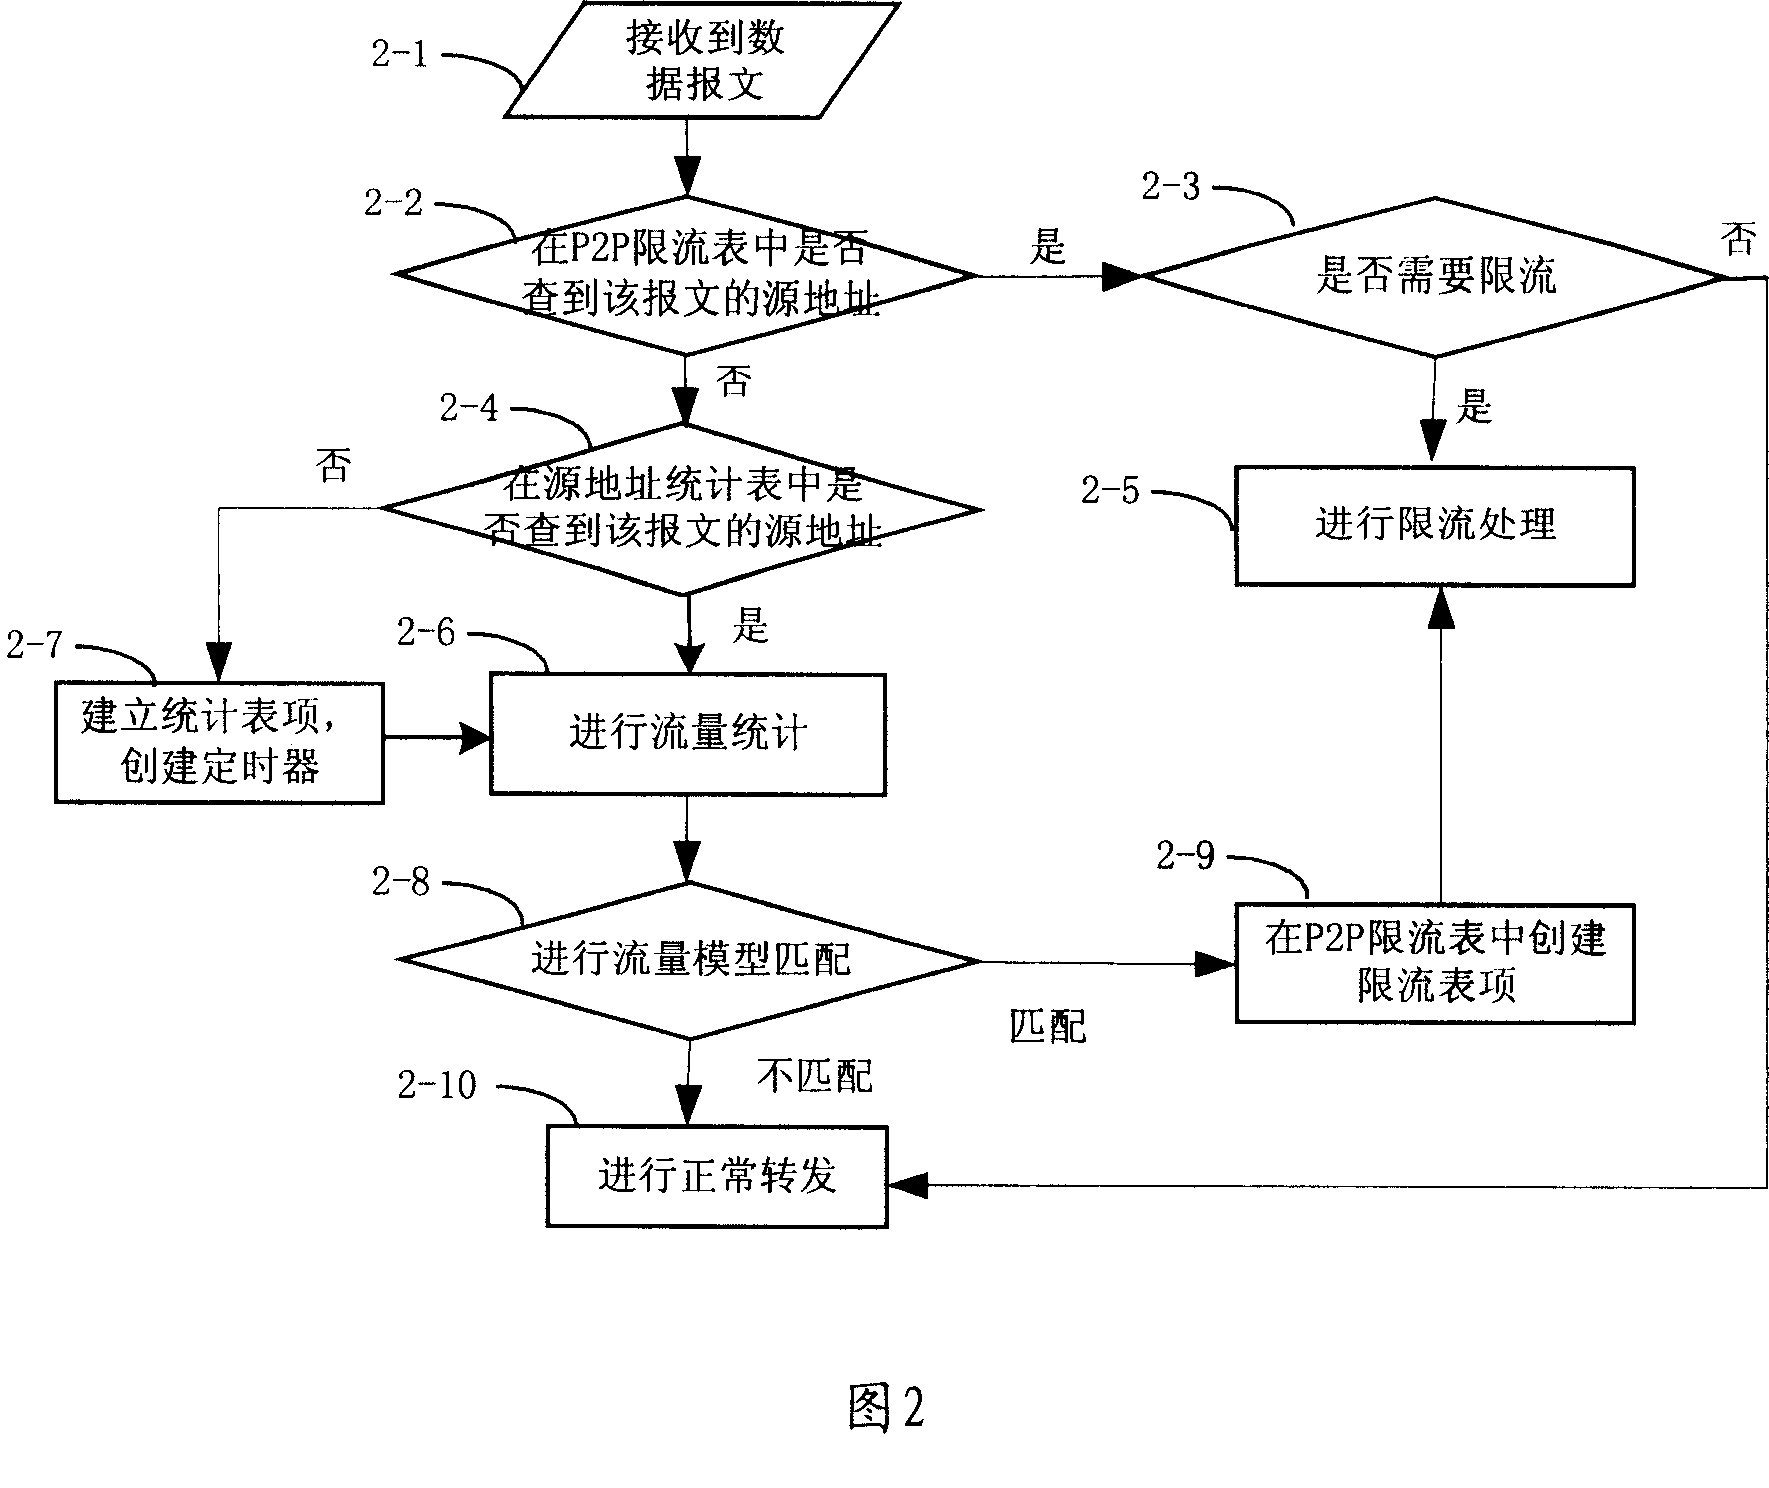 Method for limiting current for point to point application